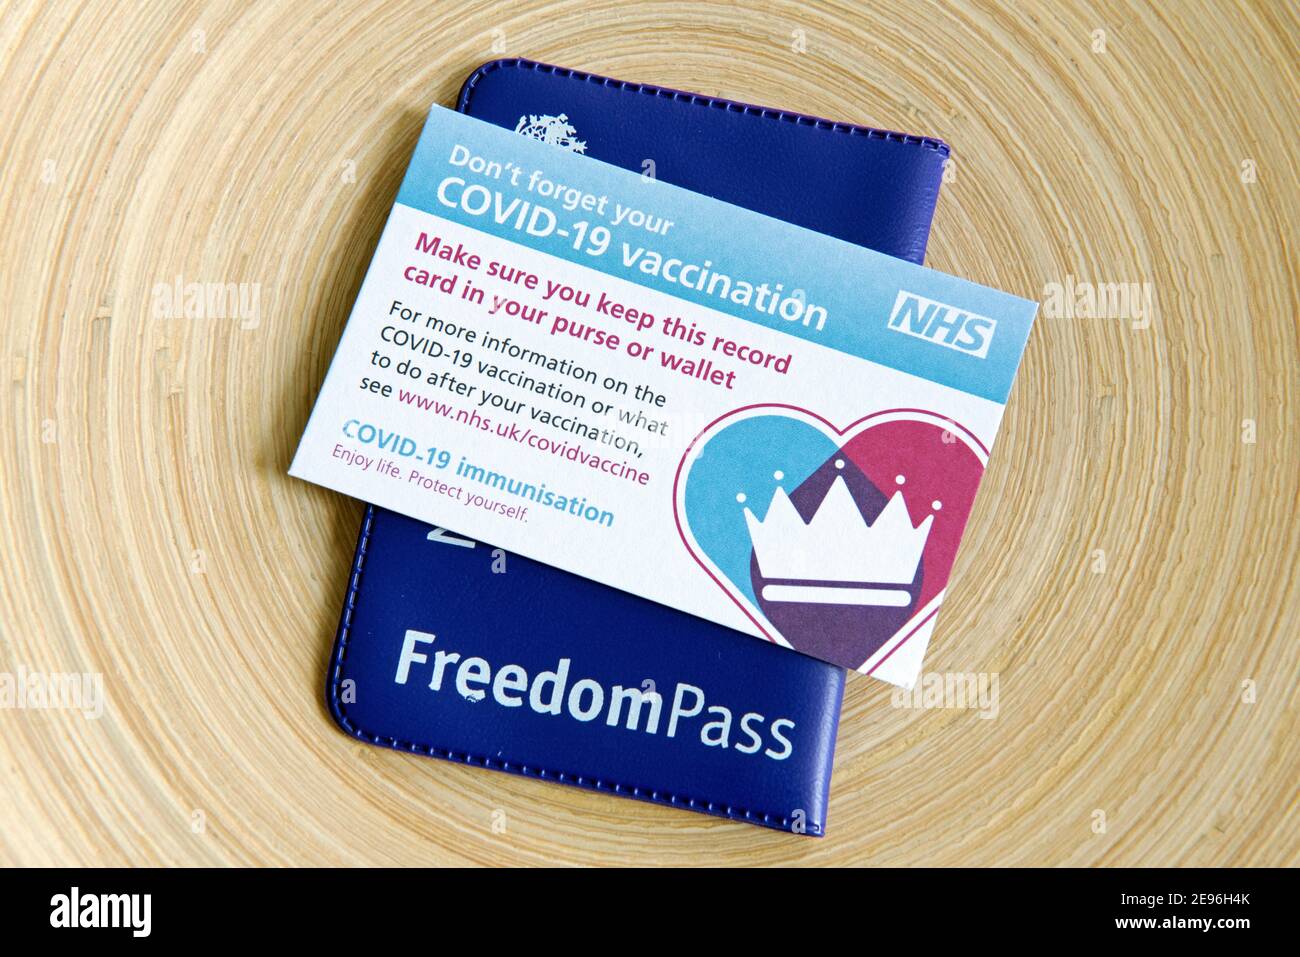 Covid-19 Vaccination or vaccine Card with Freedom Pass.  The elderly will soon be able to travel safely on public transport after their second jab. Fr Stock Photo